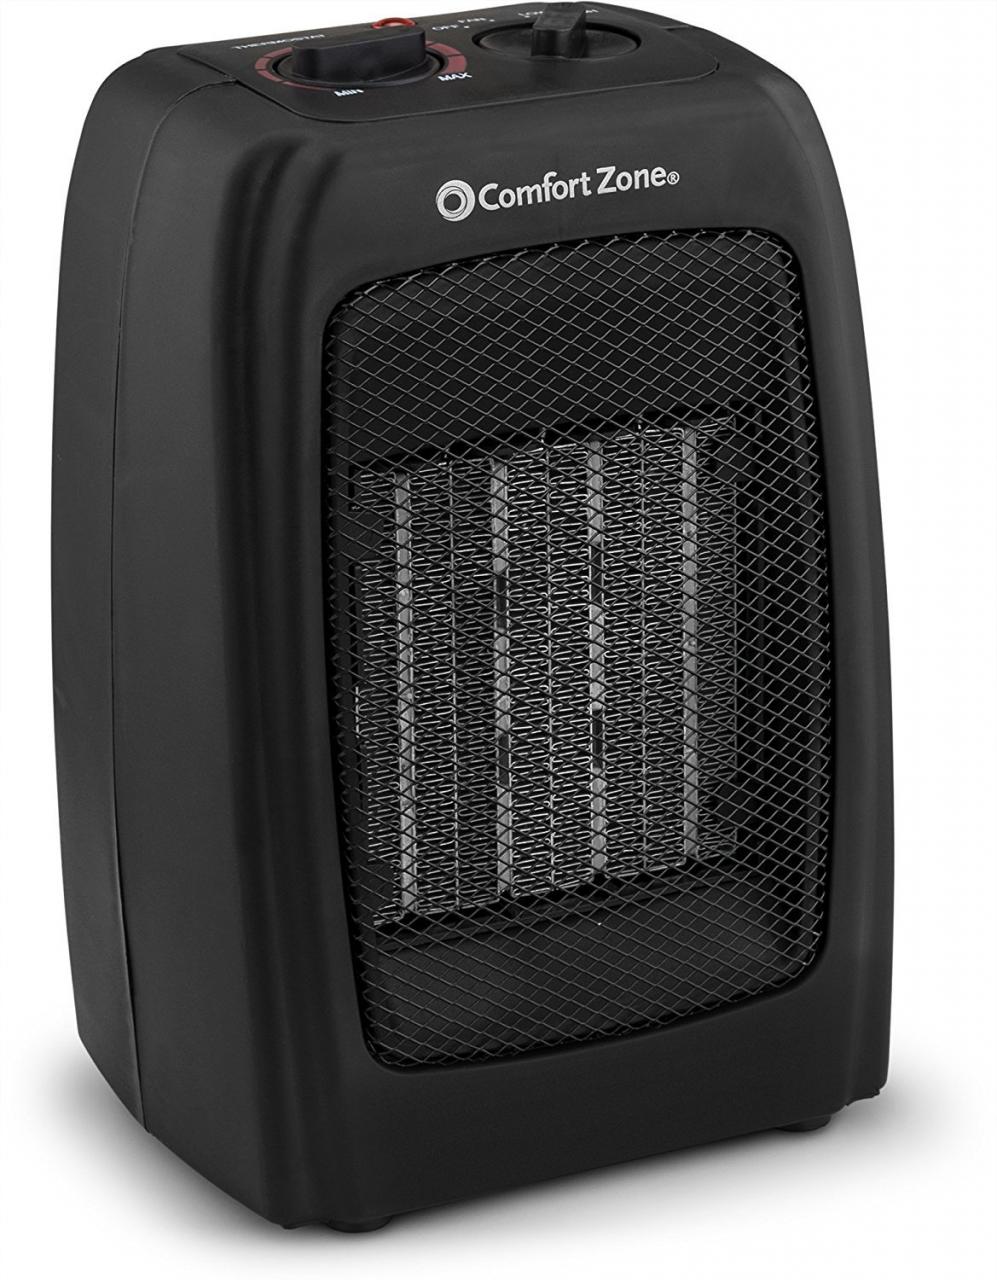 BOVADO USA Portable 166648 Ceramic Space Heater, Personal Warming Fan with  Adjustable Thermostat, Carrying Handle & Safety Features-by Comfort Zone  (Black), 10 x 6 x 6: Buy Online at Best Price in